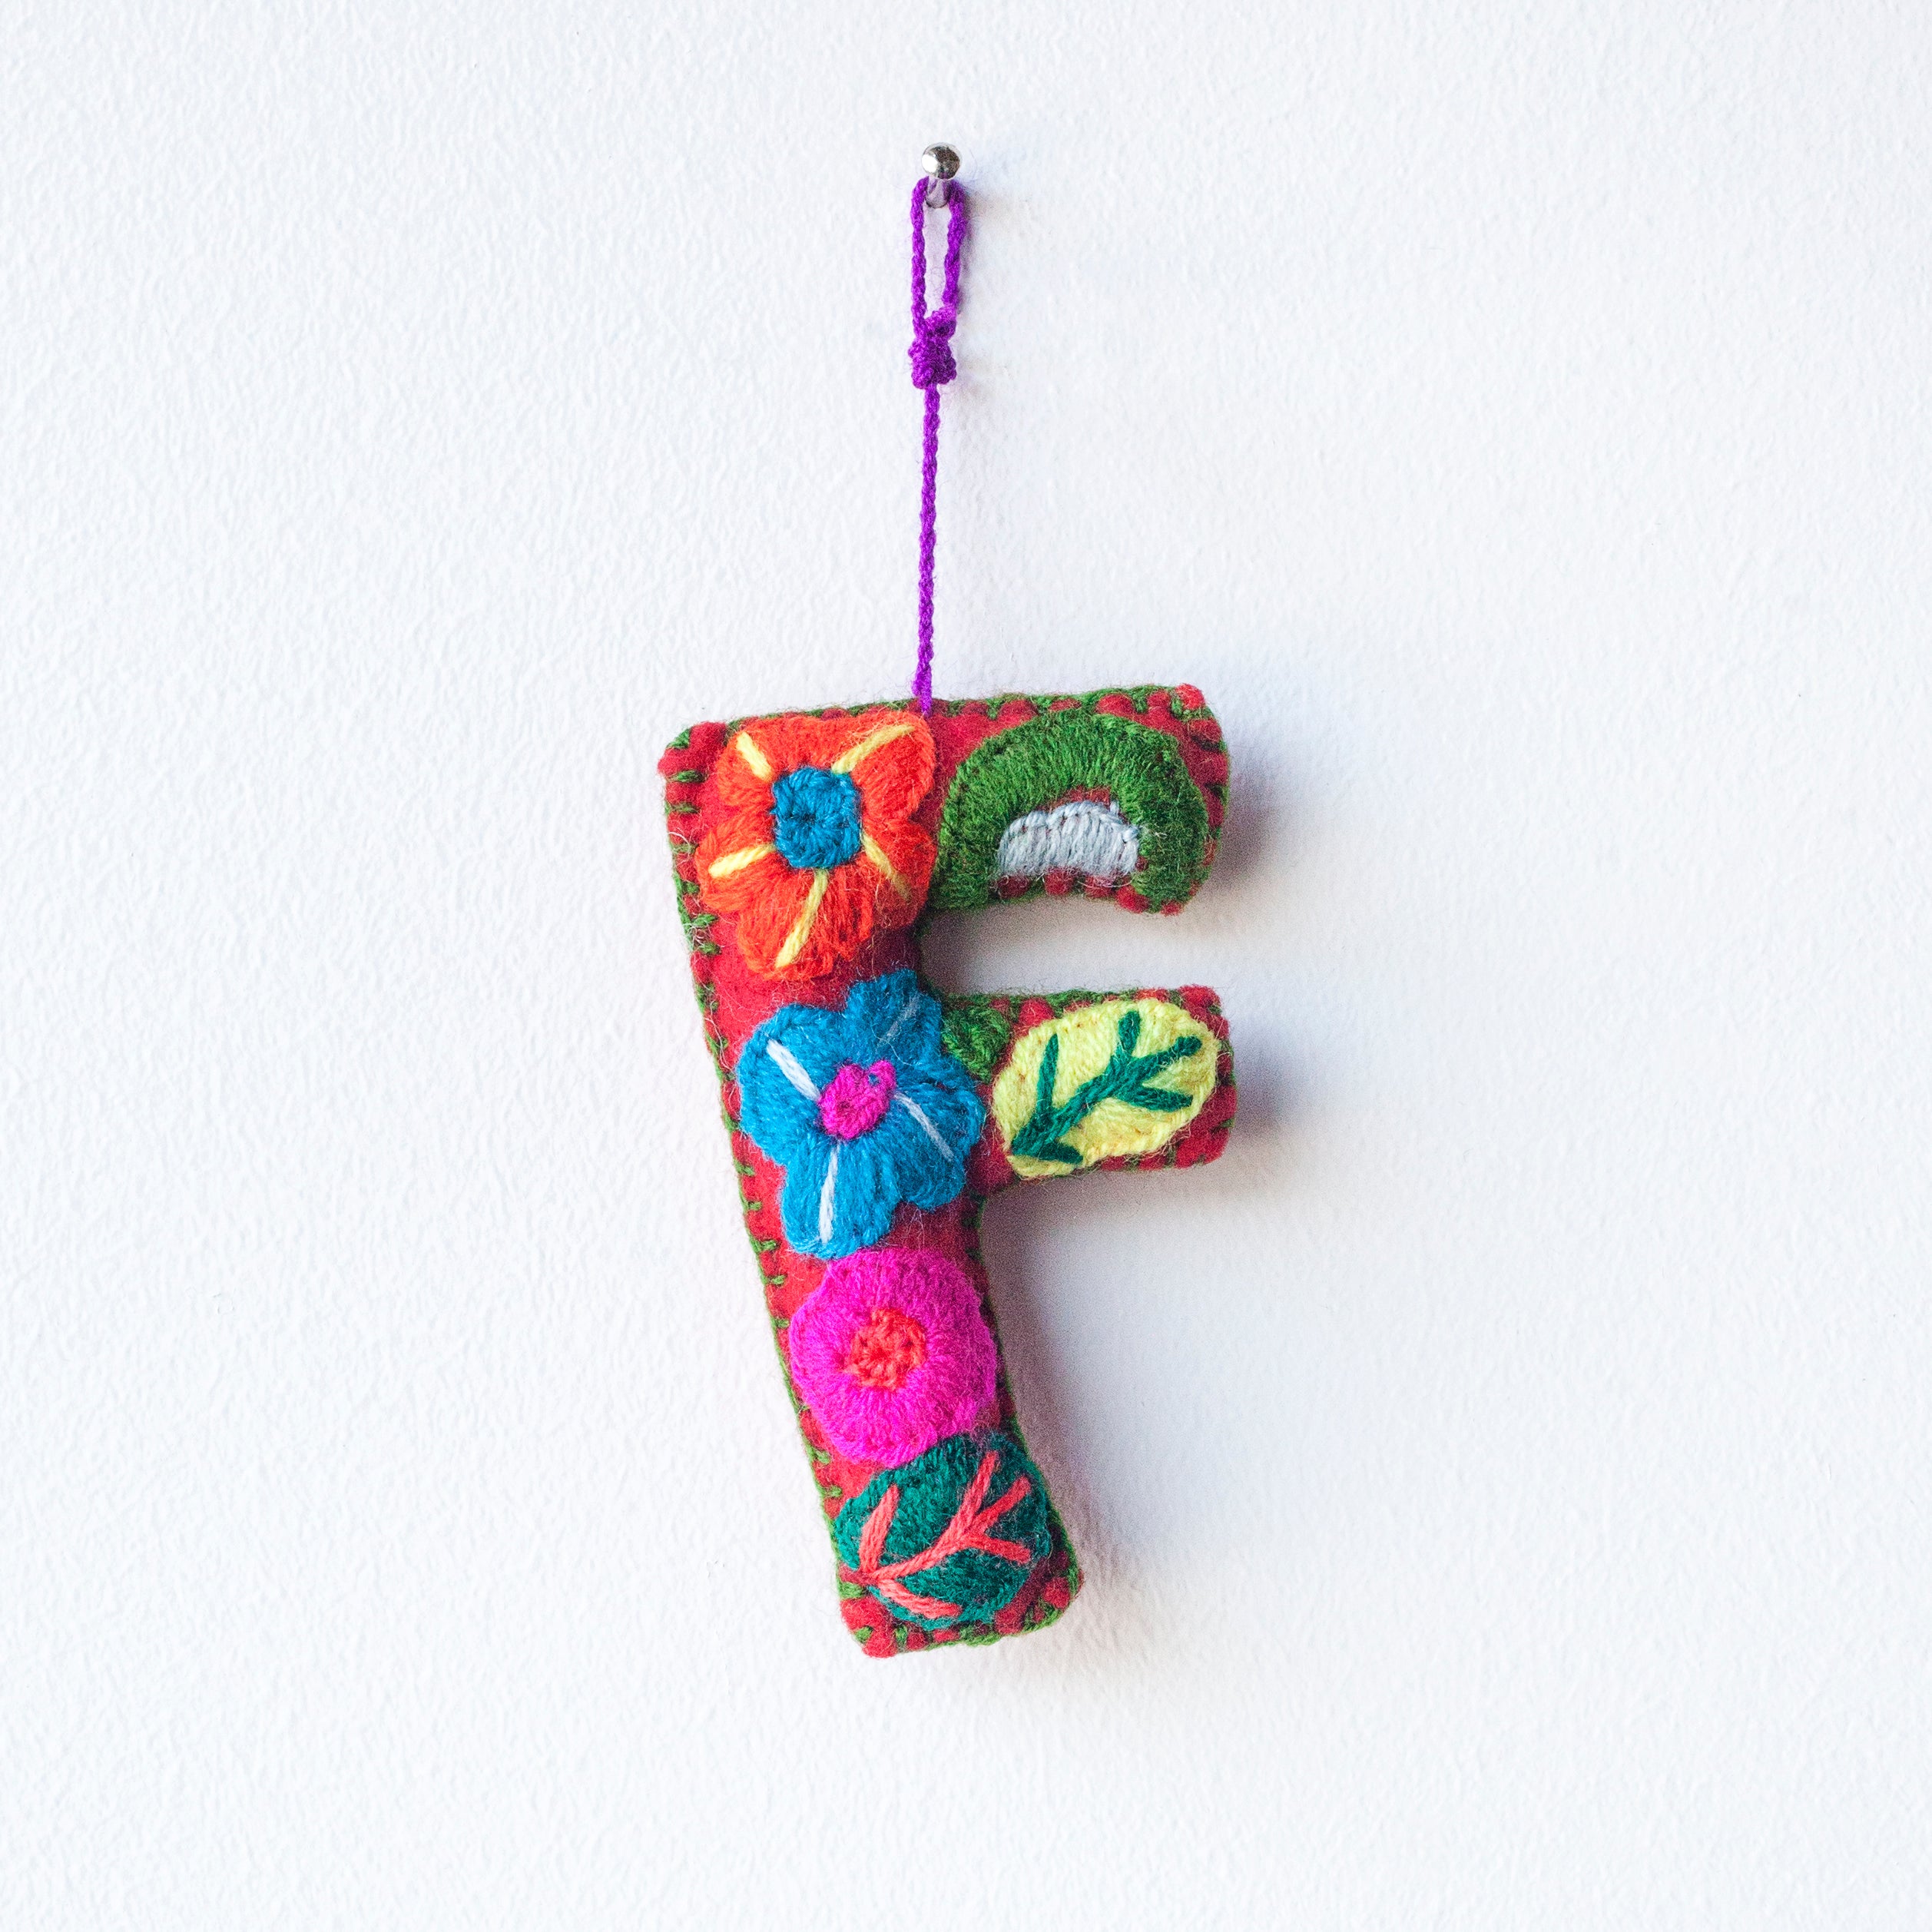 Colorful felt letter "F" with multicolor floral hand-embroidery hanging by a colorful string.